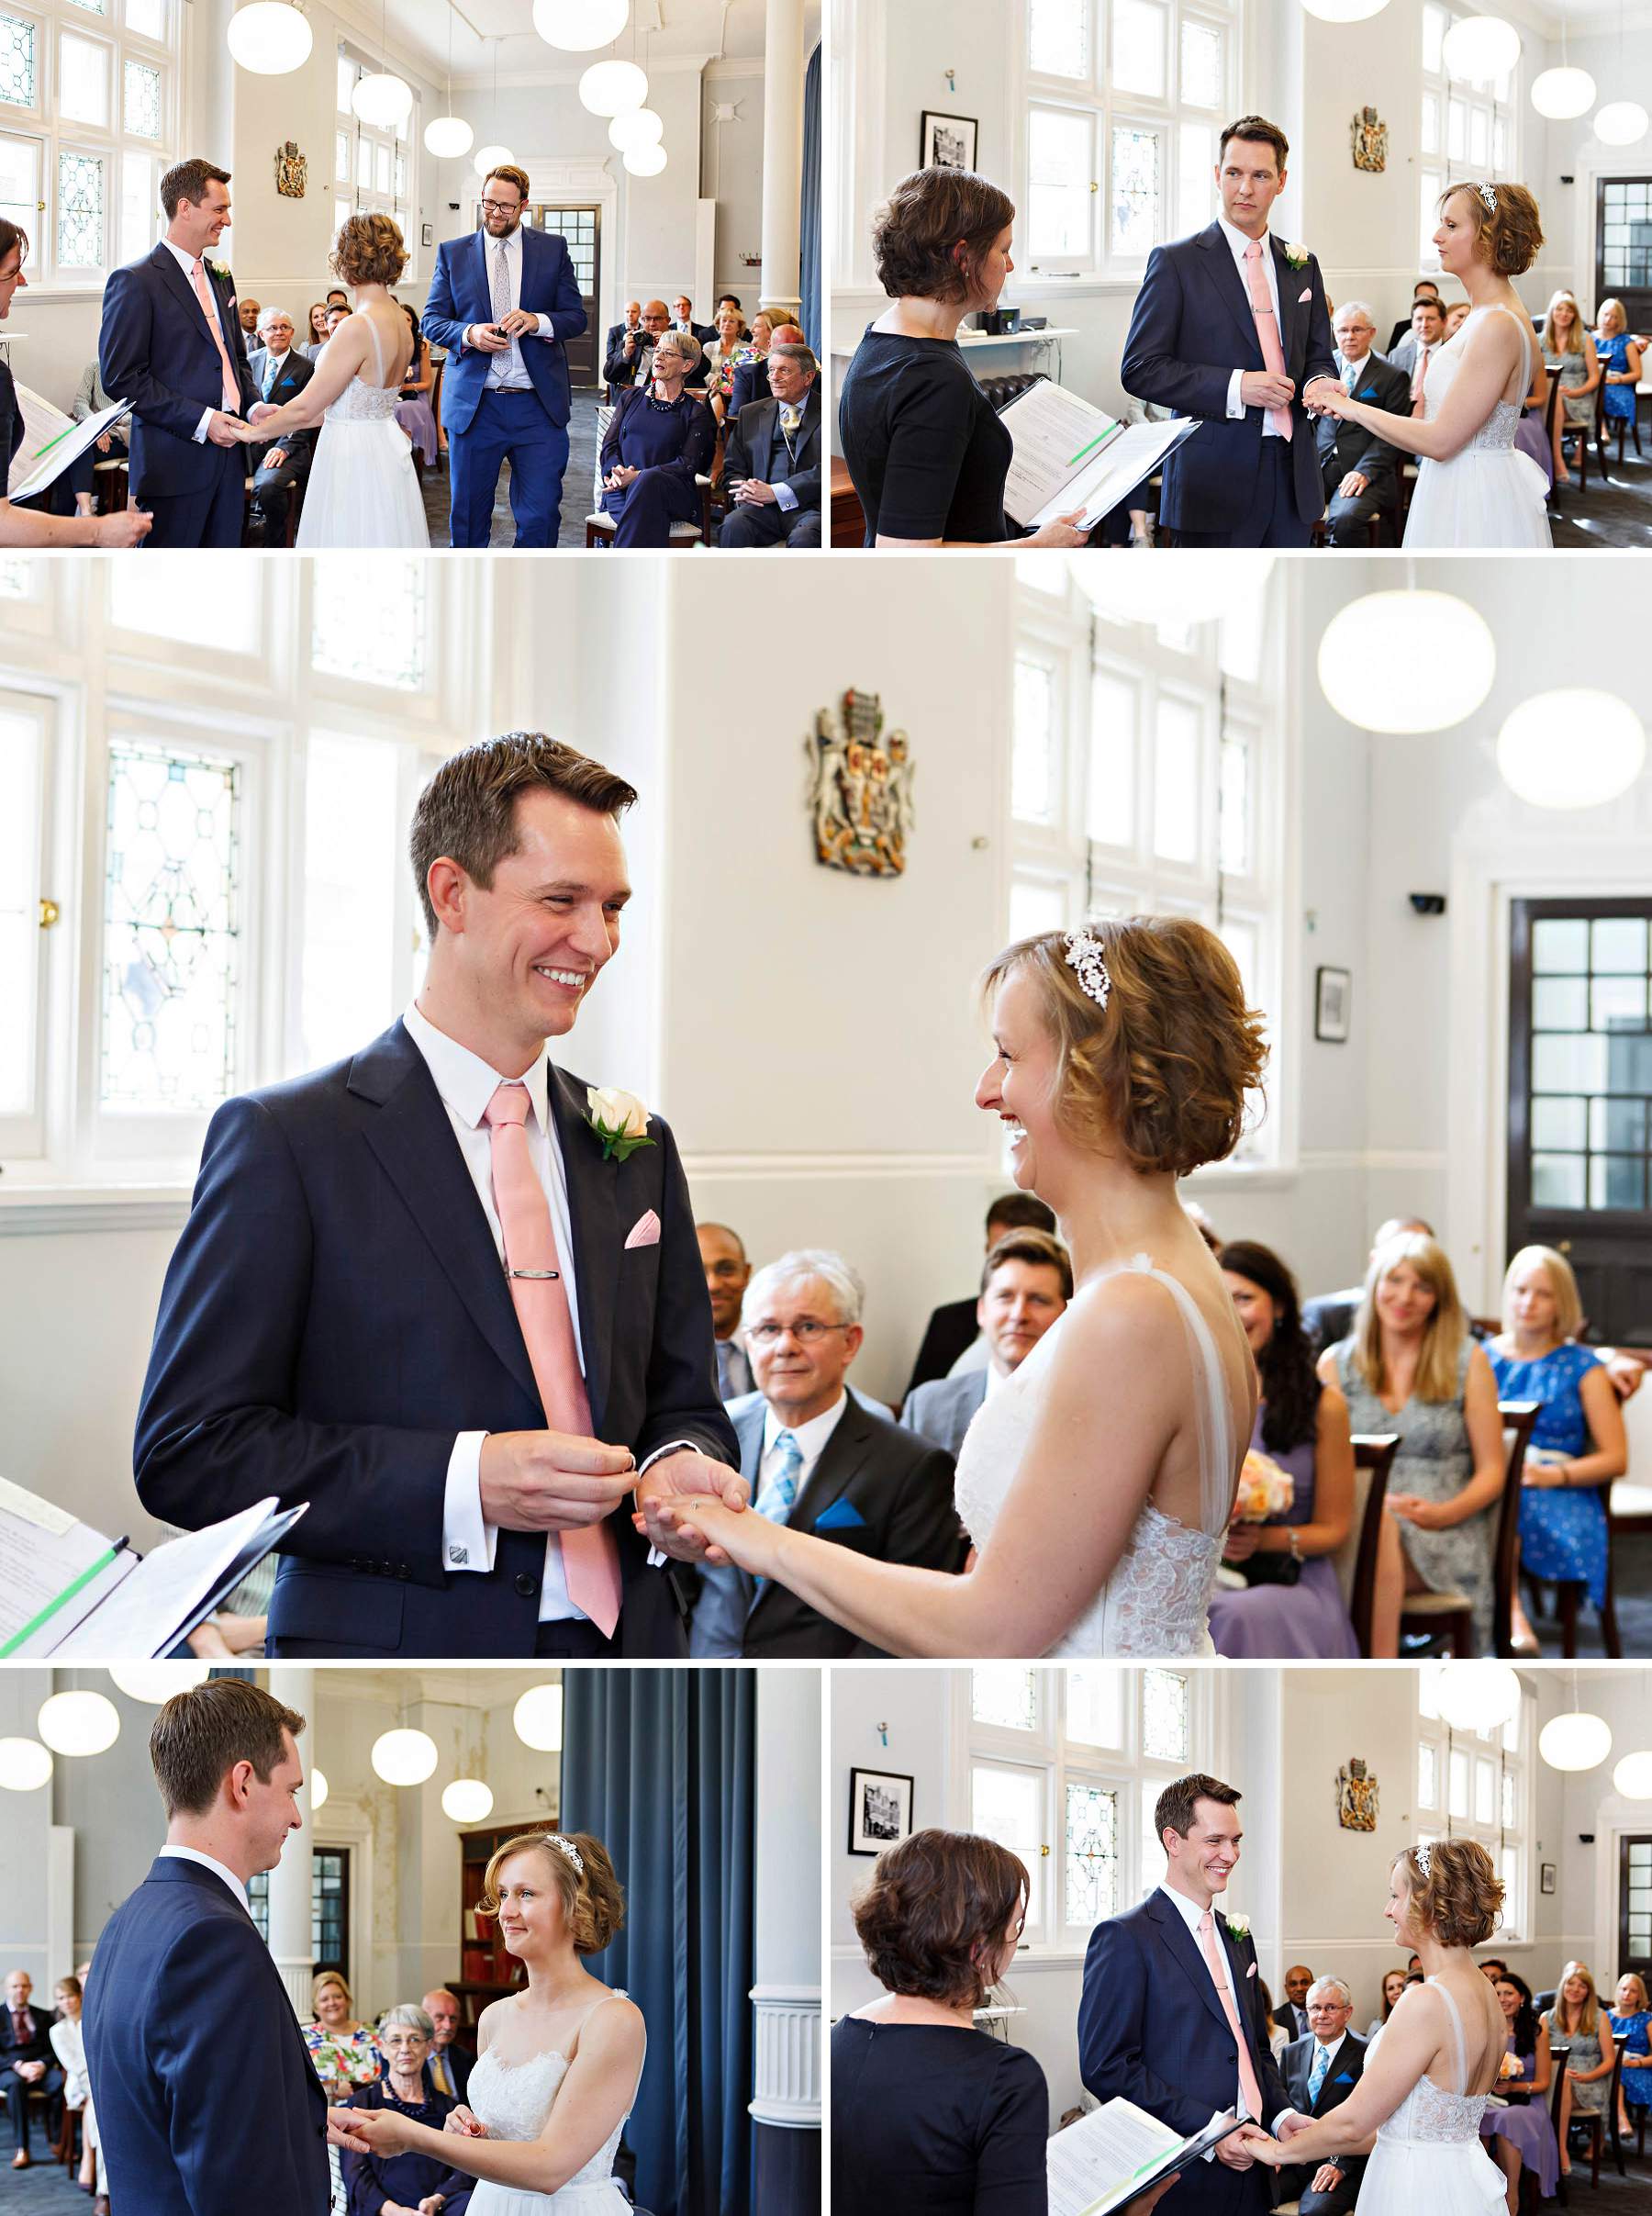 the bride and groom exchange rings during their Mayfair Library summer wedding ceremony.